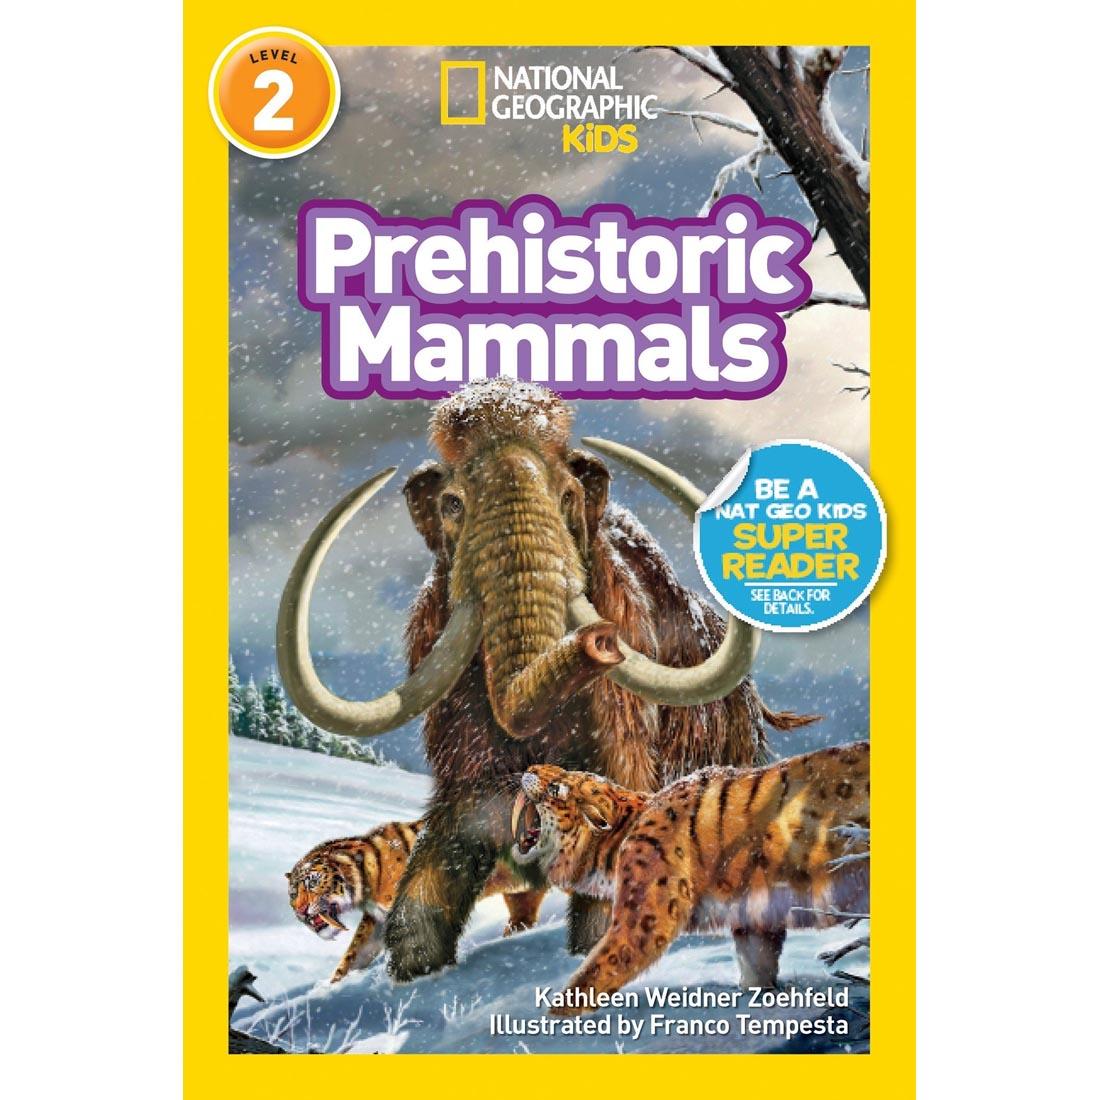 Pre-Historic Mammals Level 2 National Geographic Reader